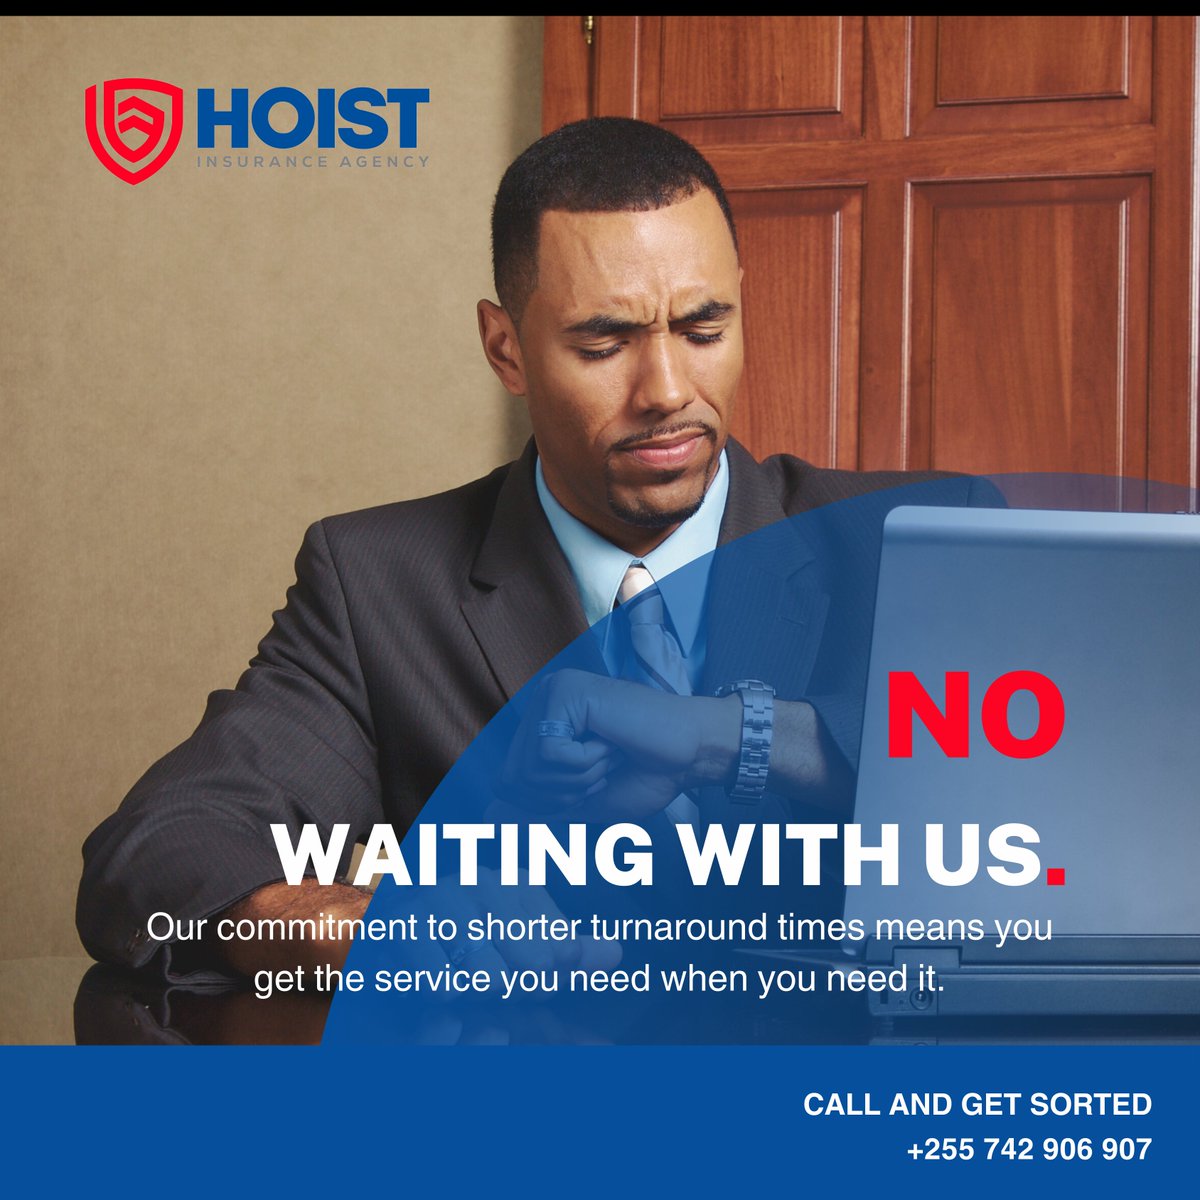 Don't wait around with us. Our commitment to shorter turnaround times ensures prompt service from underwriting to claims settlement. #PromptService #Efficiency